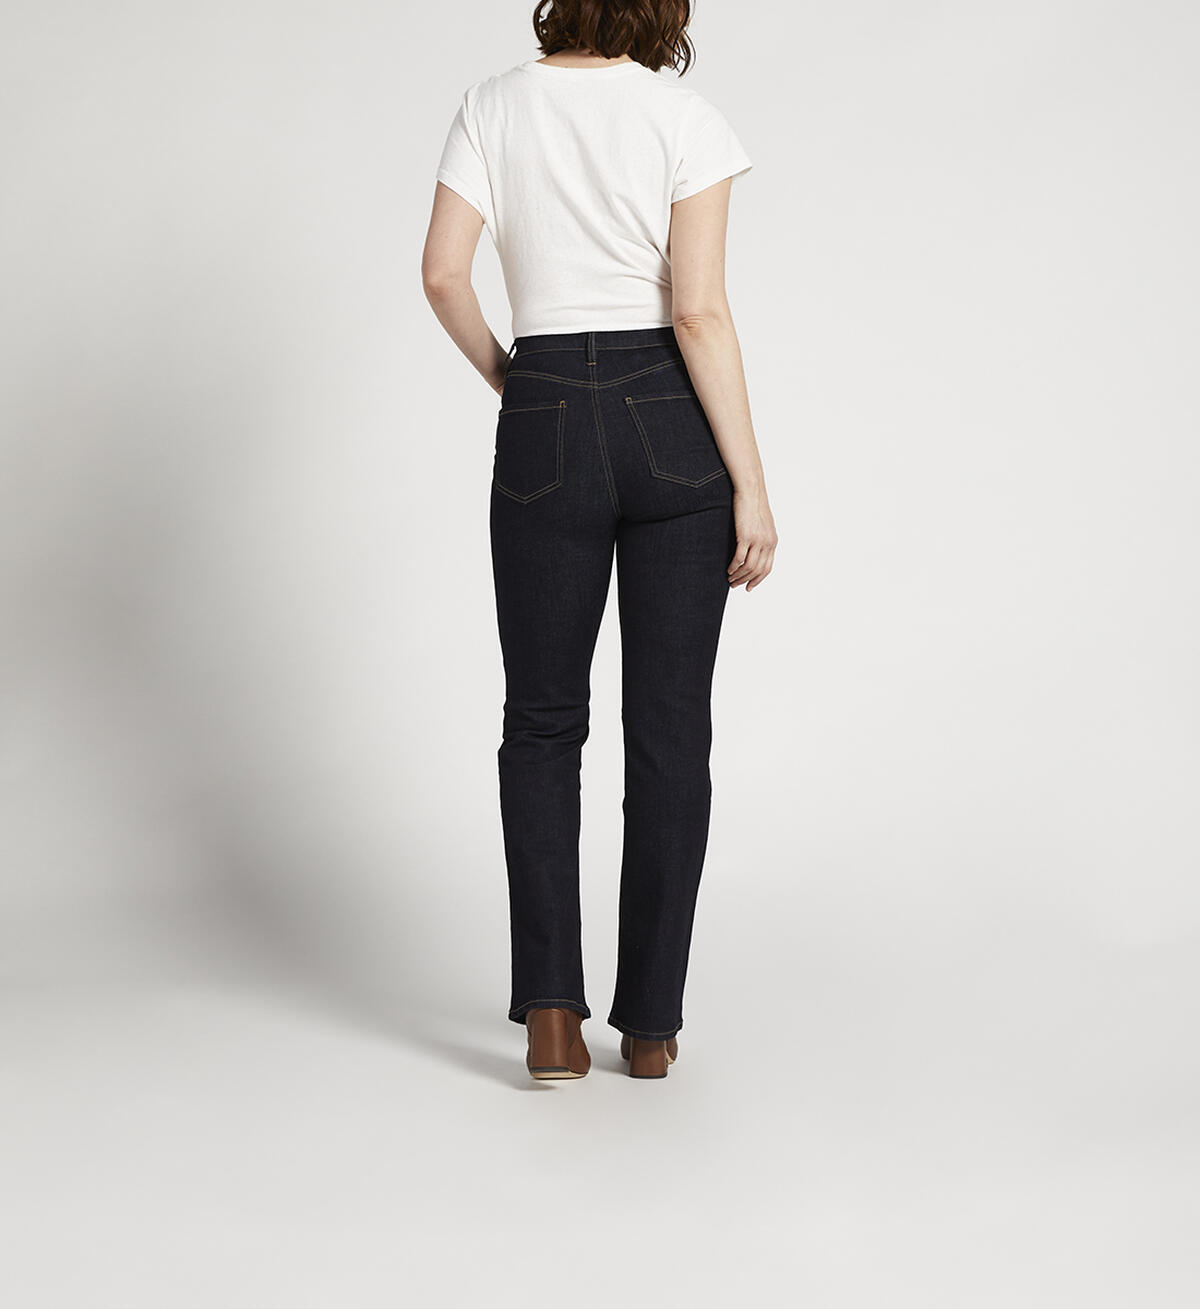 Phoebe High Rise Bootcut Jeans, , hi-res image number 1